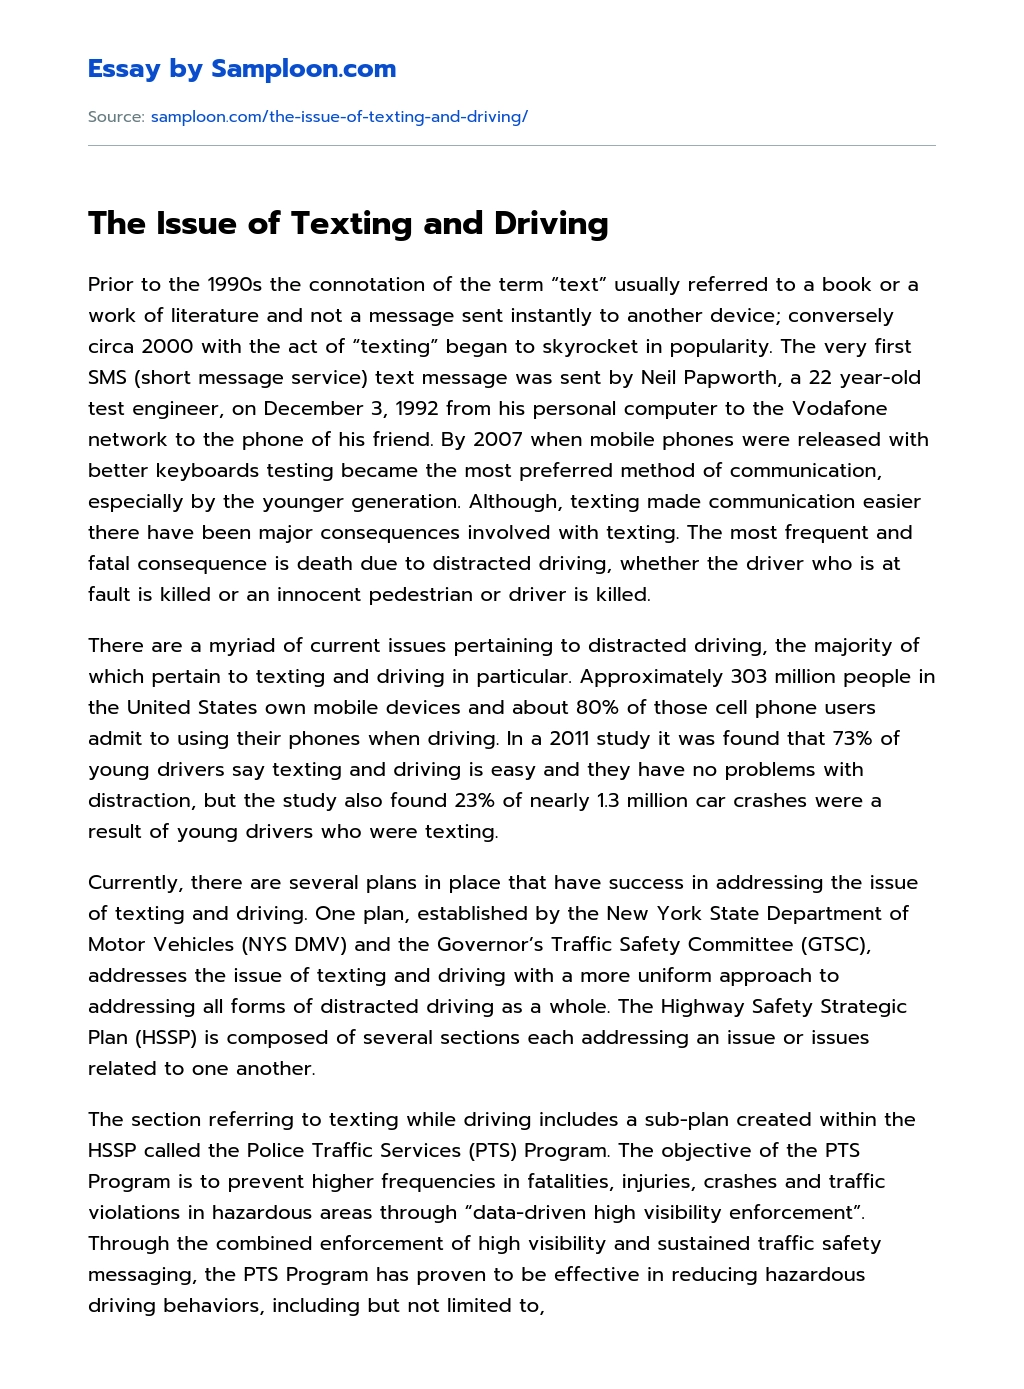 The Issue of Texting and Driving essay